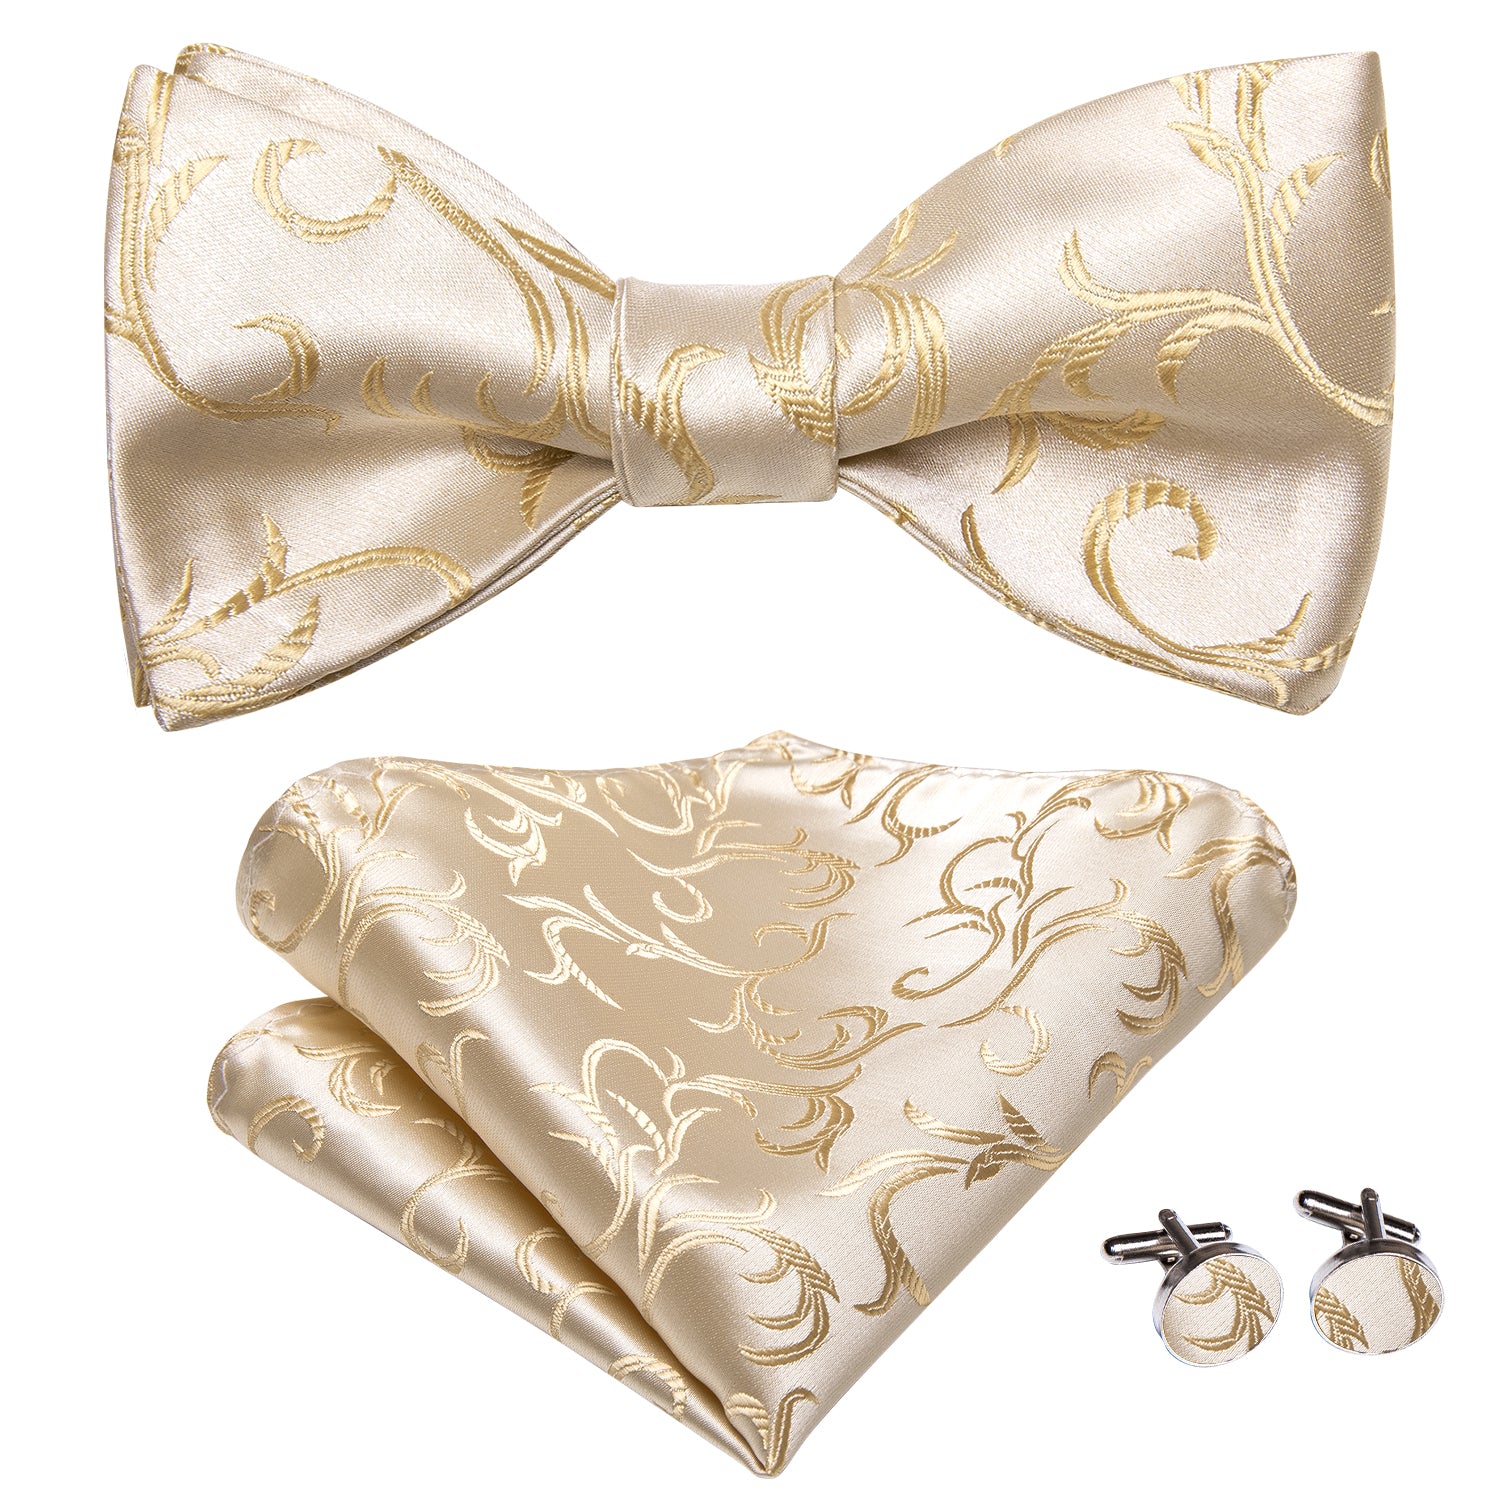 New White Champagne Leaves Self-tied Bow Tie Pocket Square Cufflinks Set